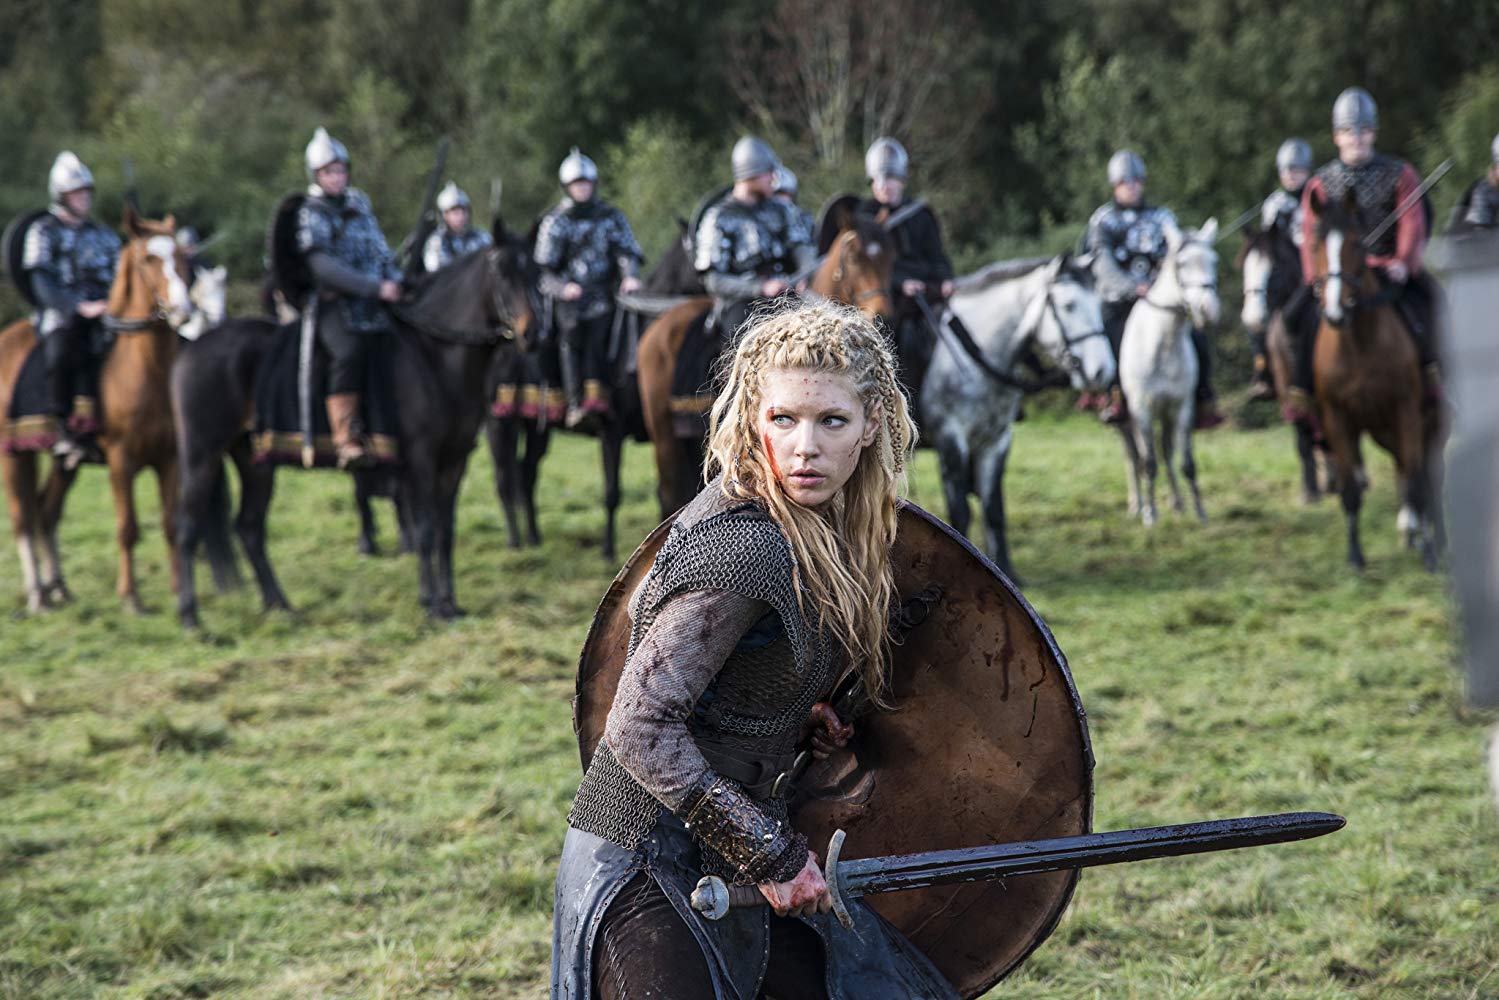 How historically accurate are shows like Vikings, and The Last